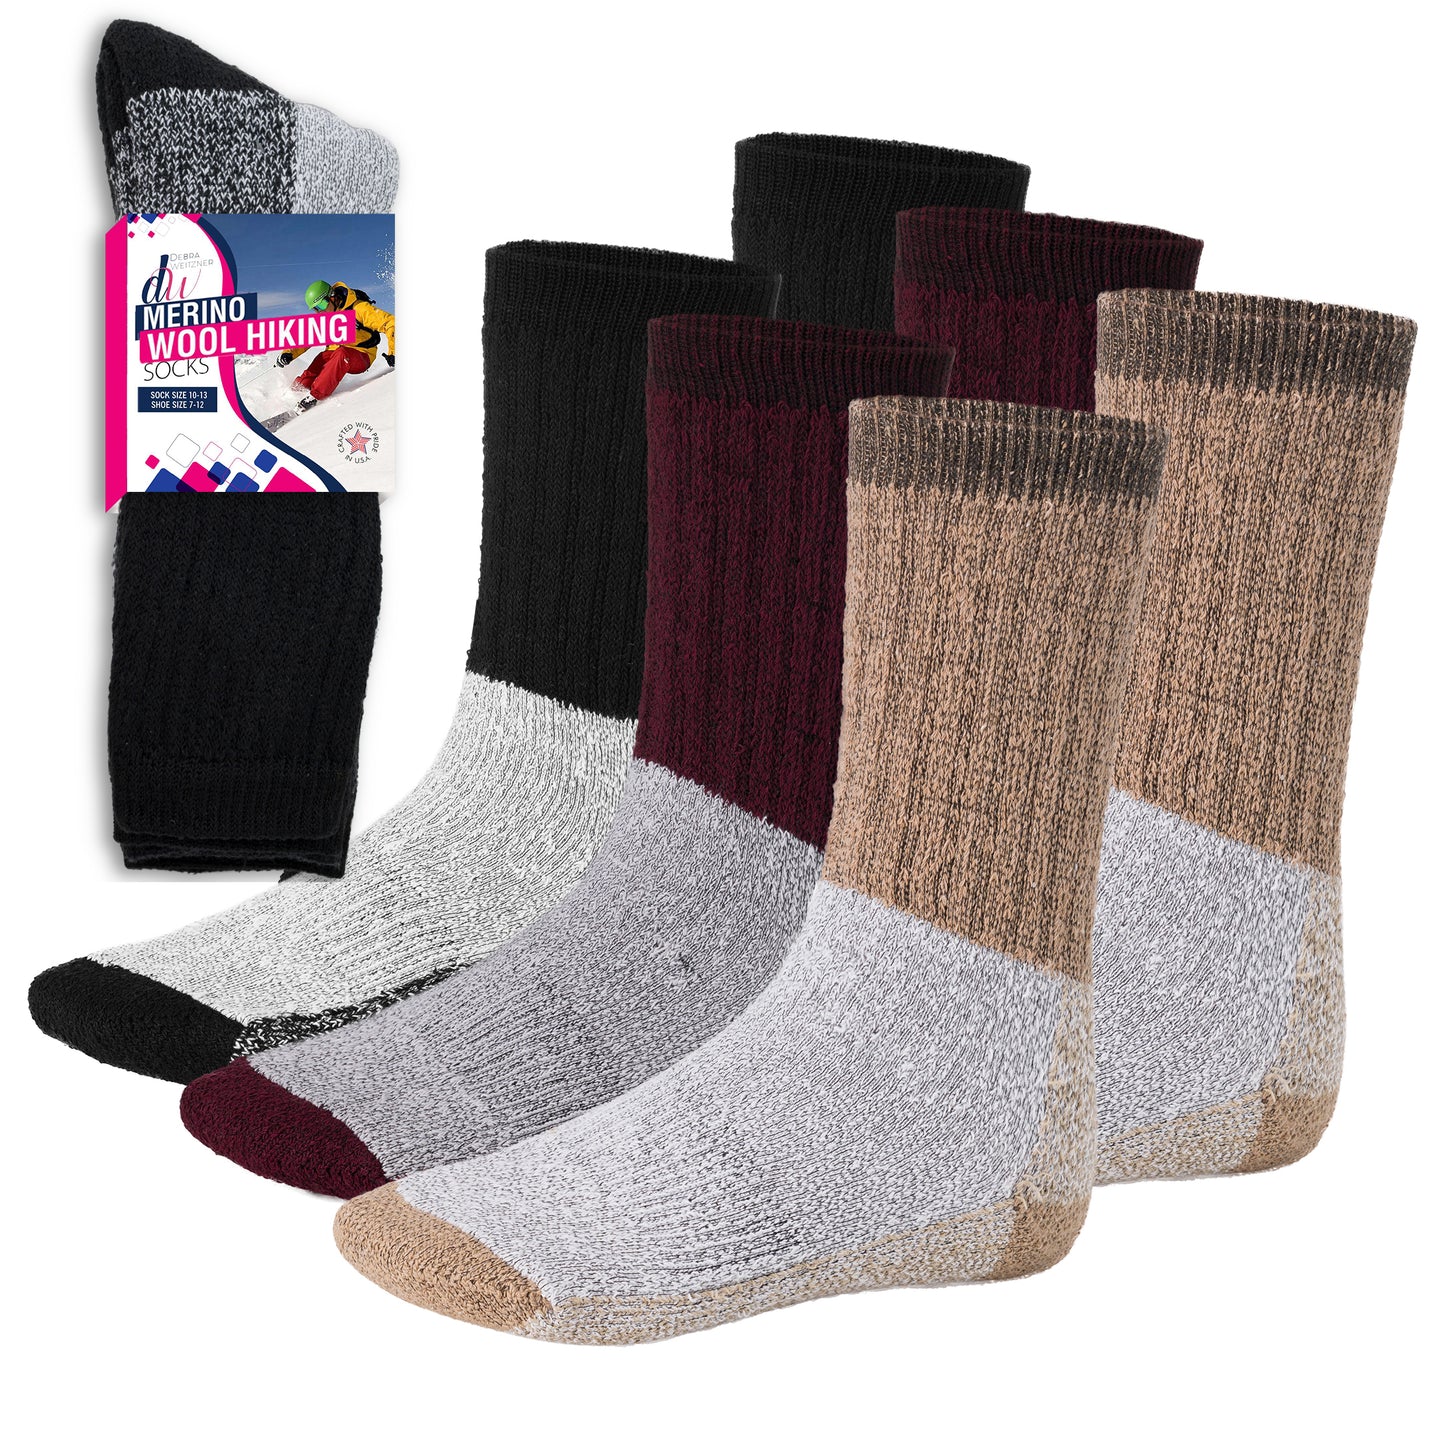 Thermal Hiking Socks for Men and Women - 3 Pairs